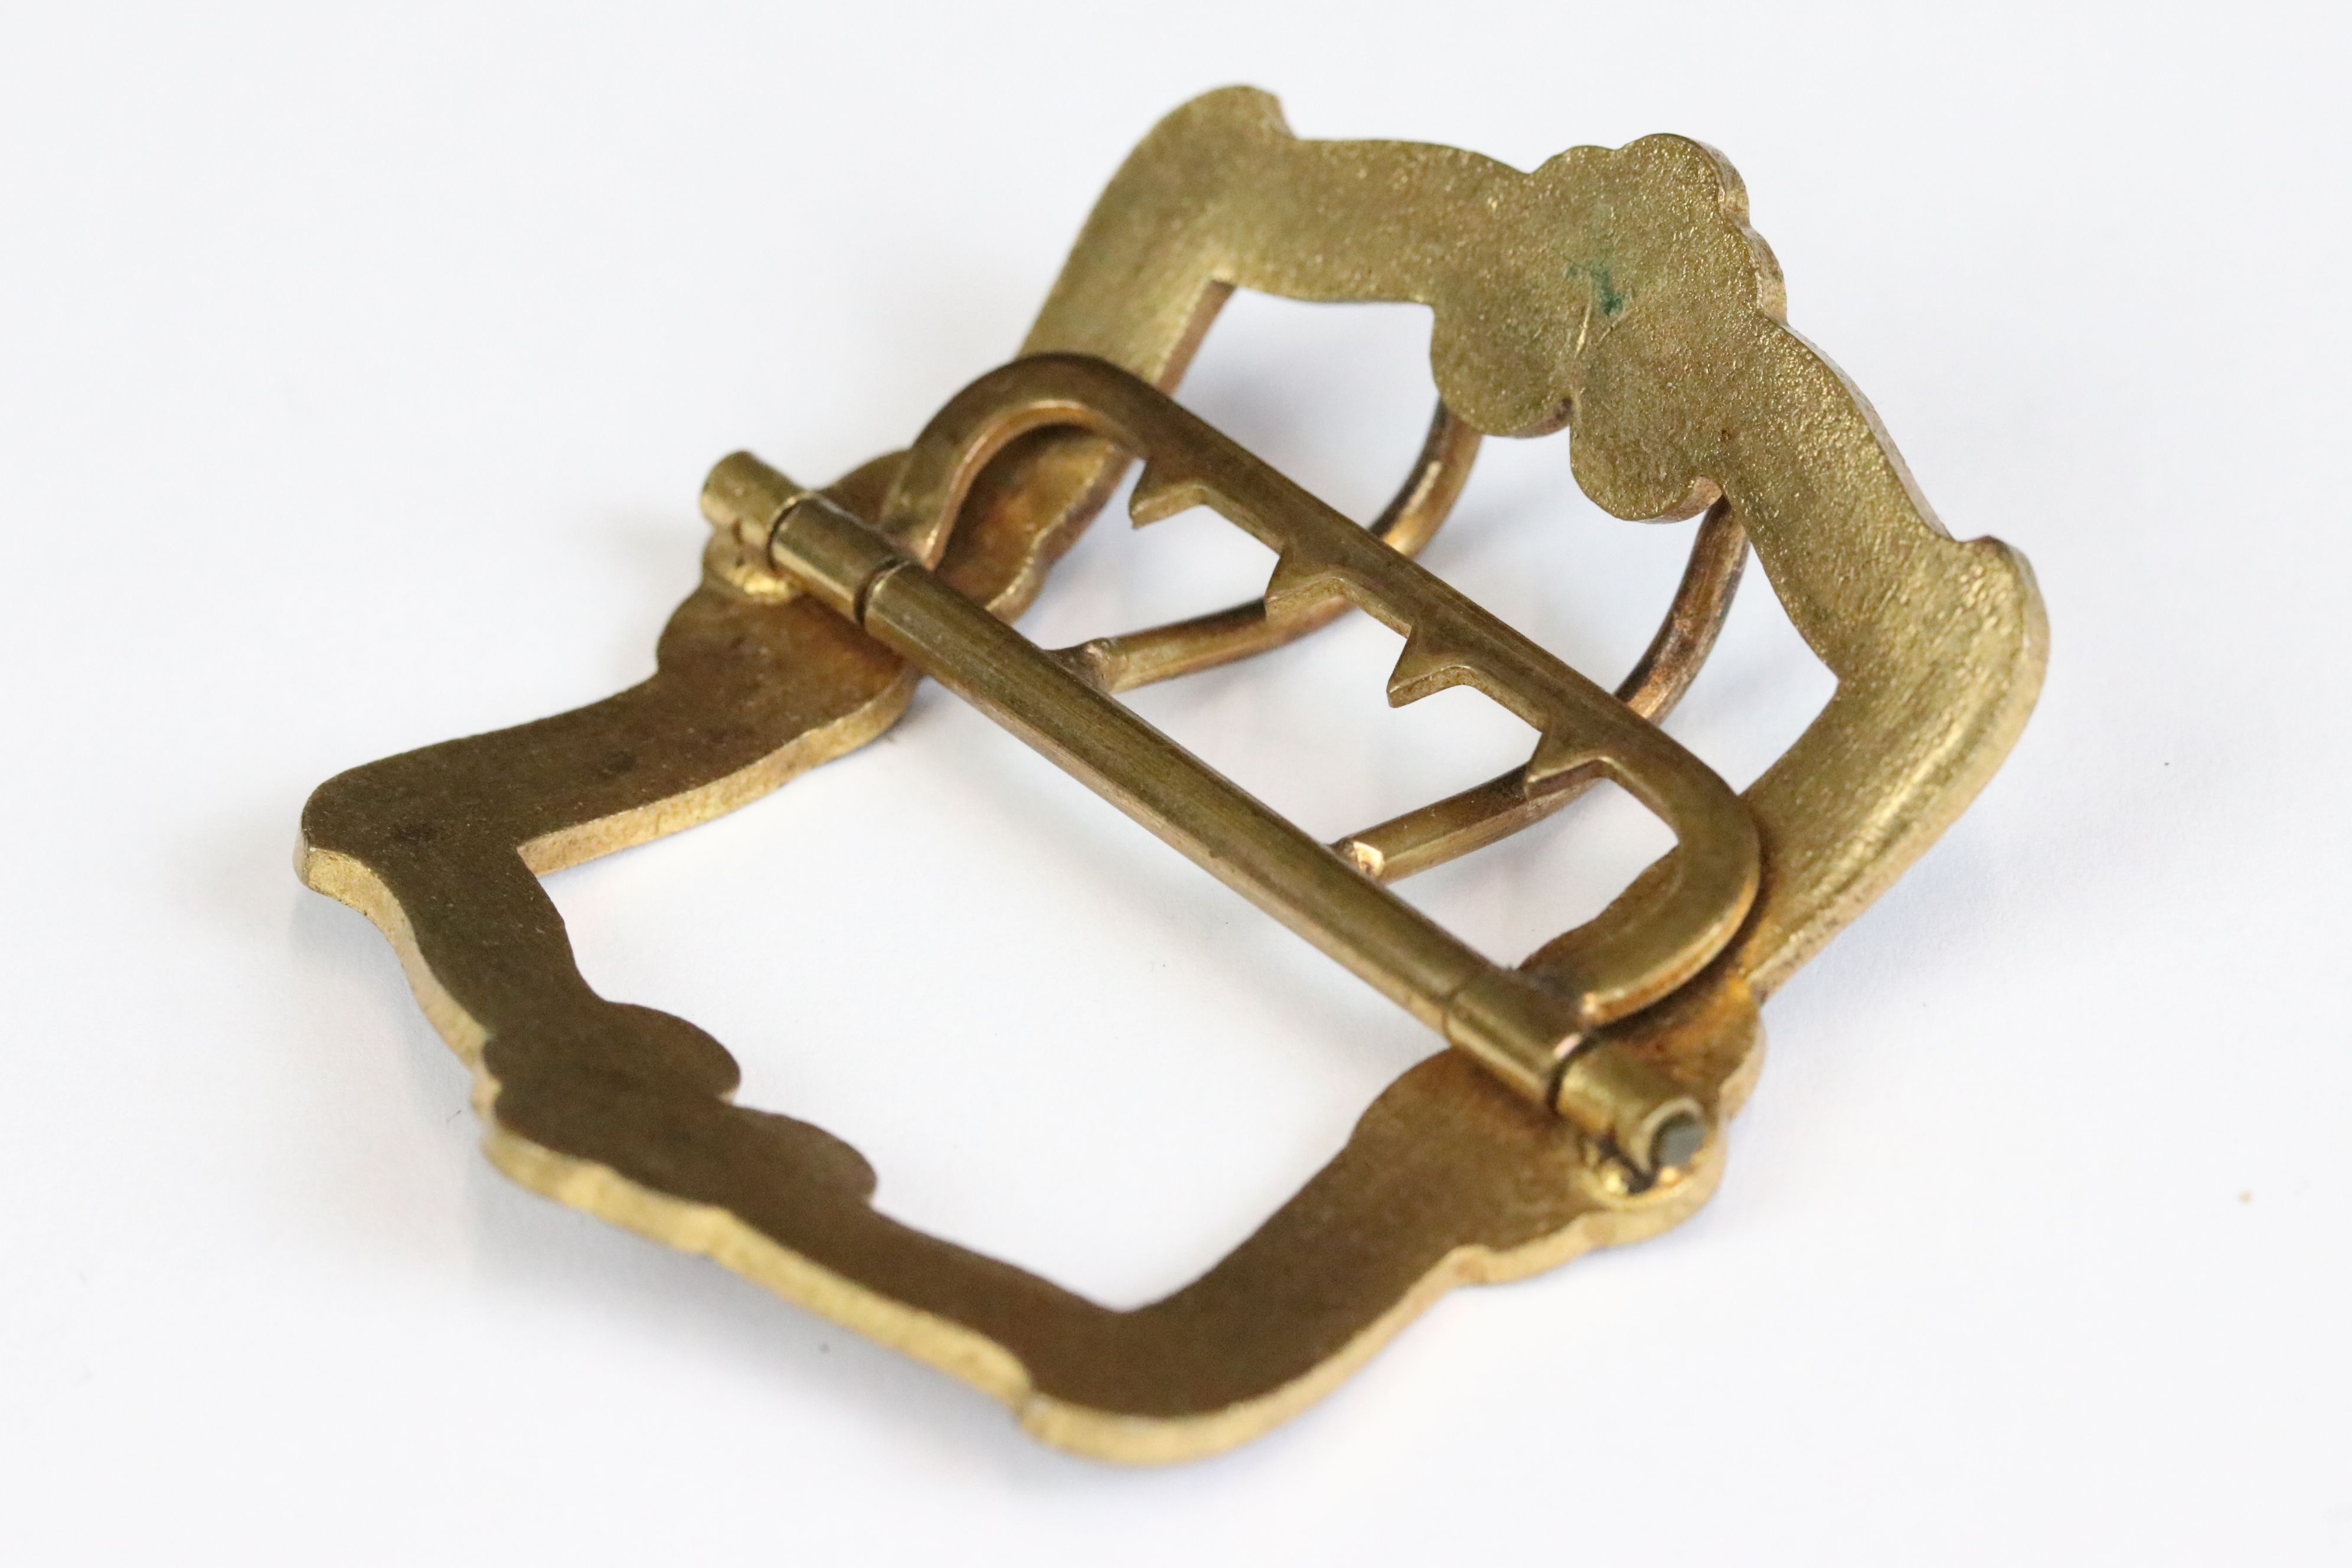 An antique brass shoe buckle with ornate purple enamel decoration. - Image 2 of 3